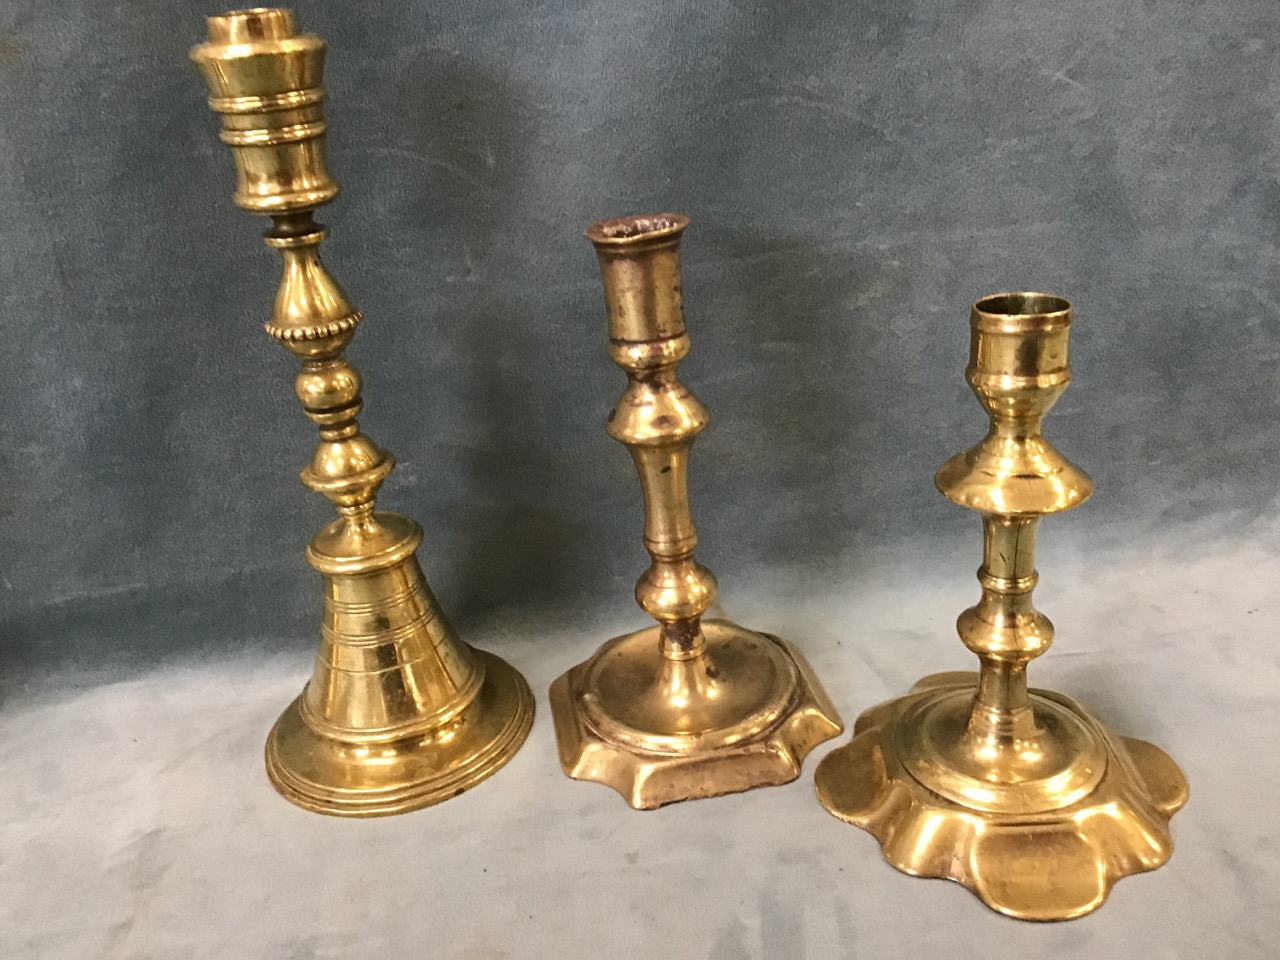 A pair of early brass candlesticks with scalloped rims and bases, having knopped columns and tubular - Bild 3 aus 3